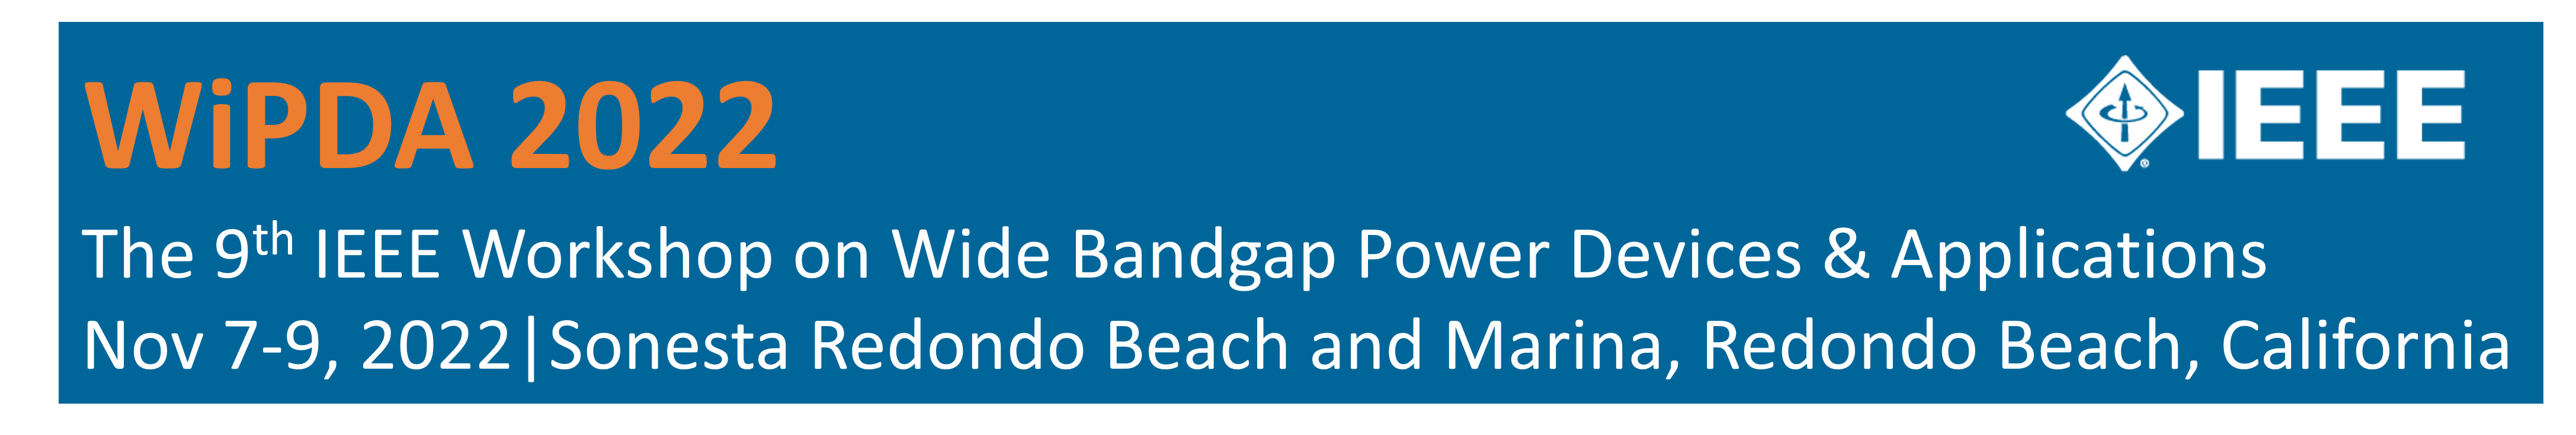 The 9th Workshop on Wide Bandgap Power Devices and Applications (WiPDA 2022) home